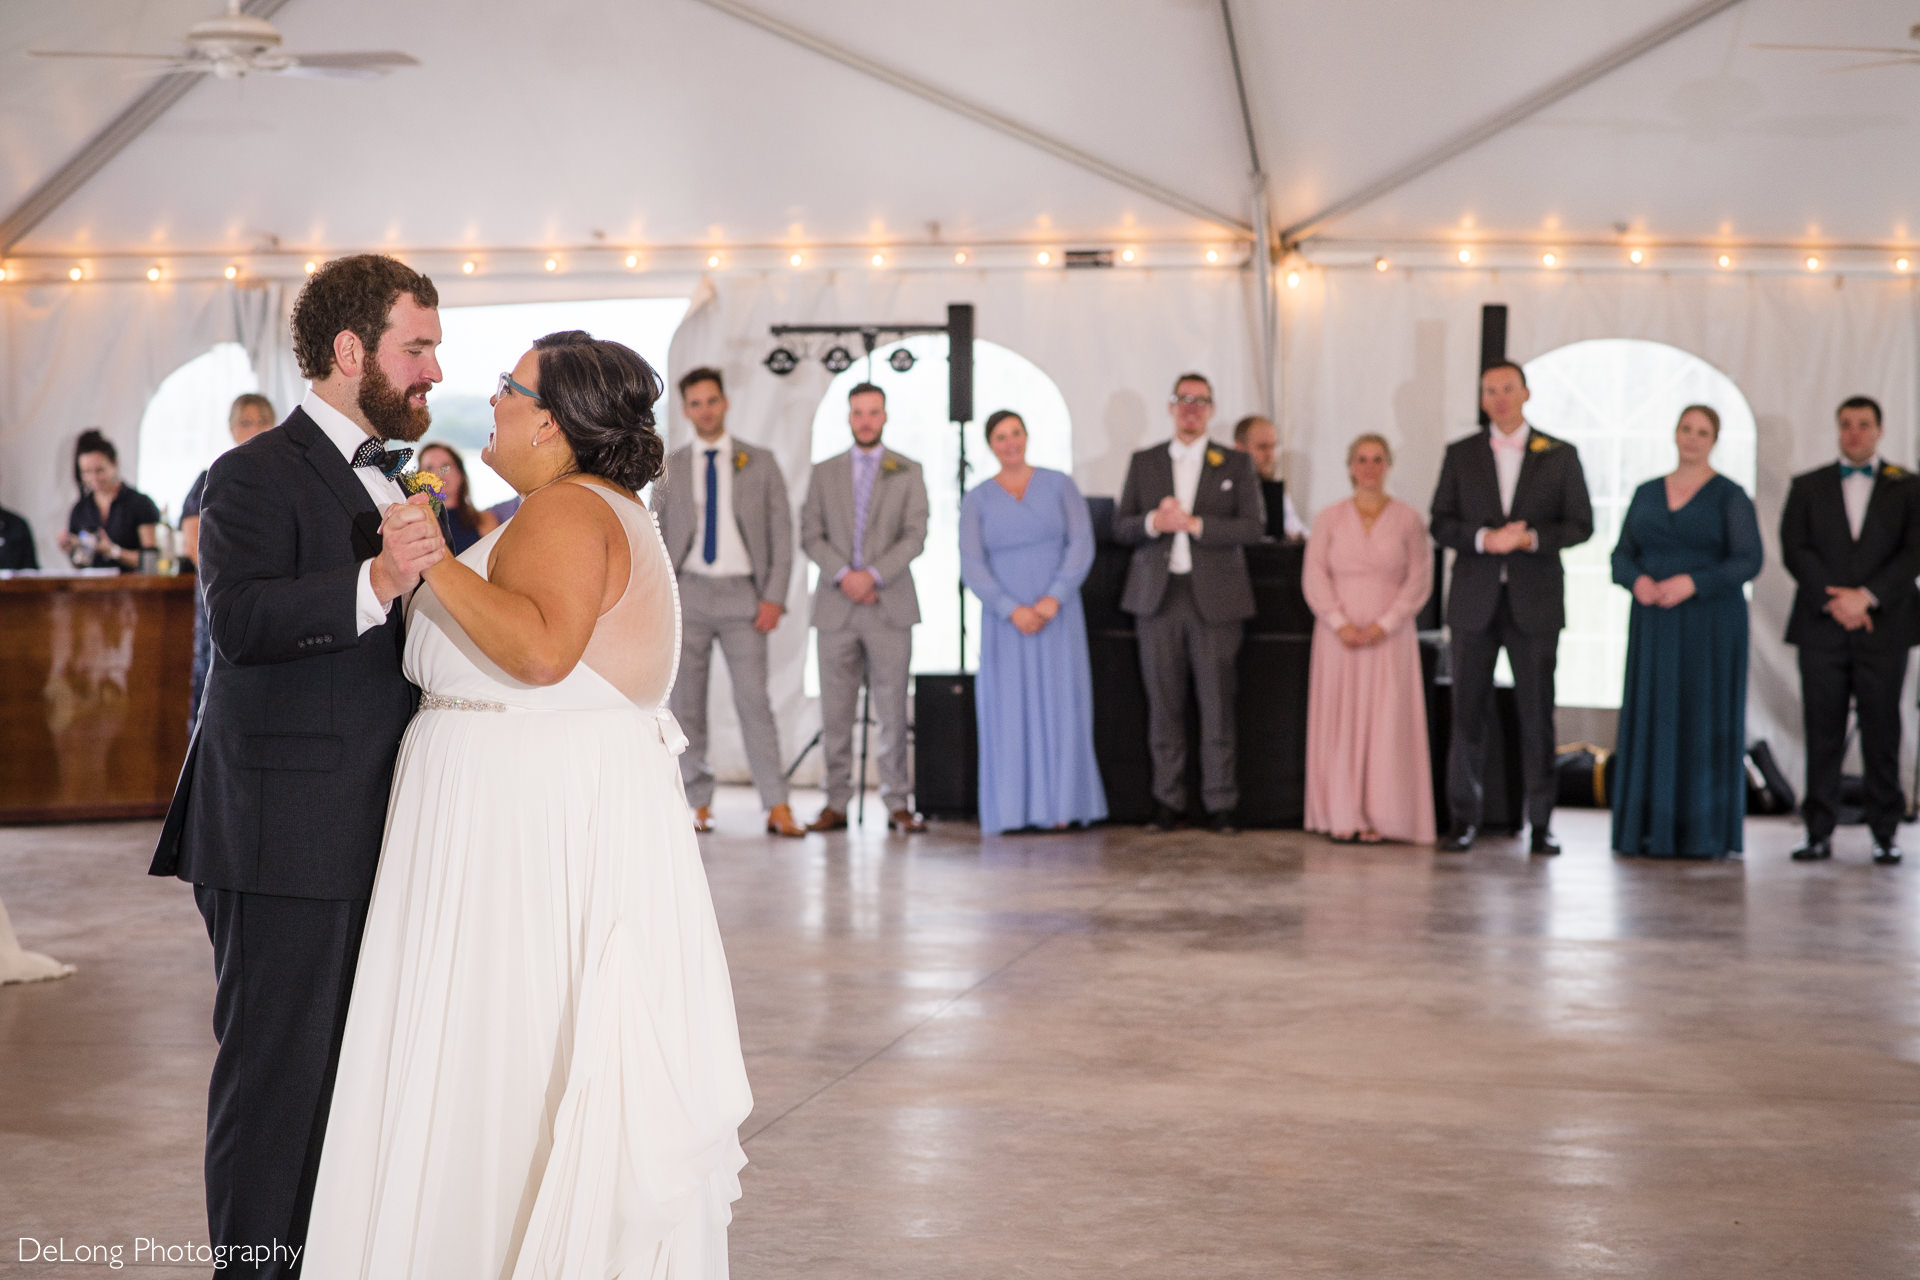 Bride and groom sharing their first dance with their wedding party in the background at the Island House in Charleston, SC by Charlotte Wedding Photographers DeLong Photography